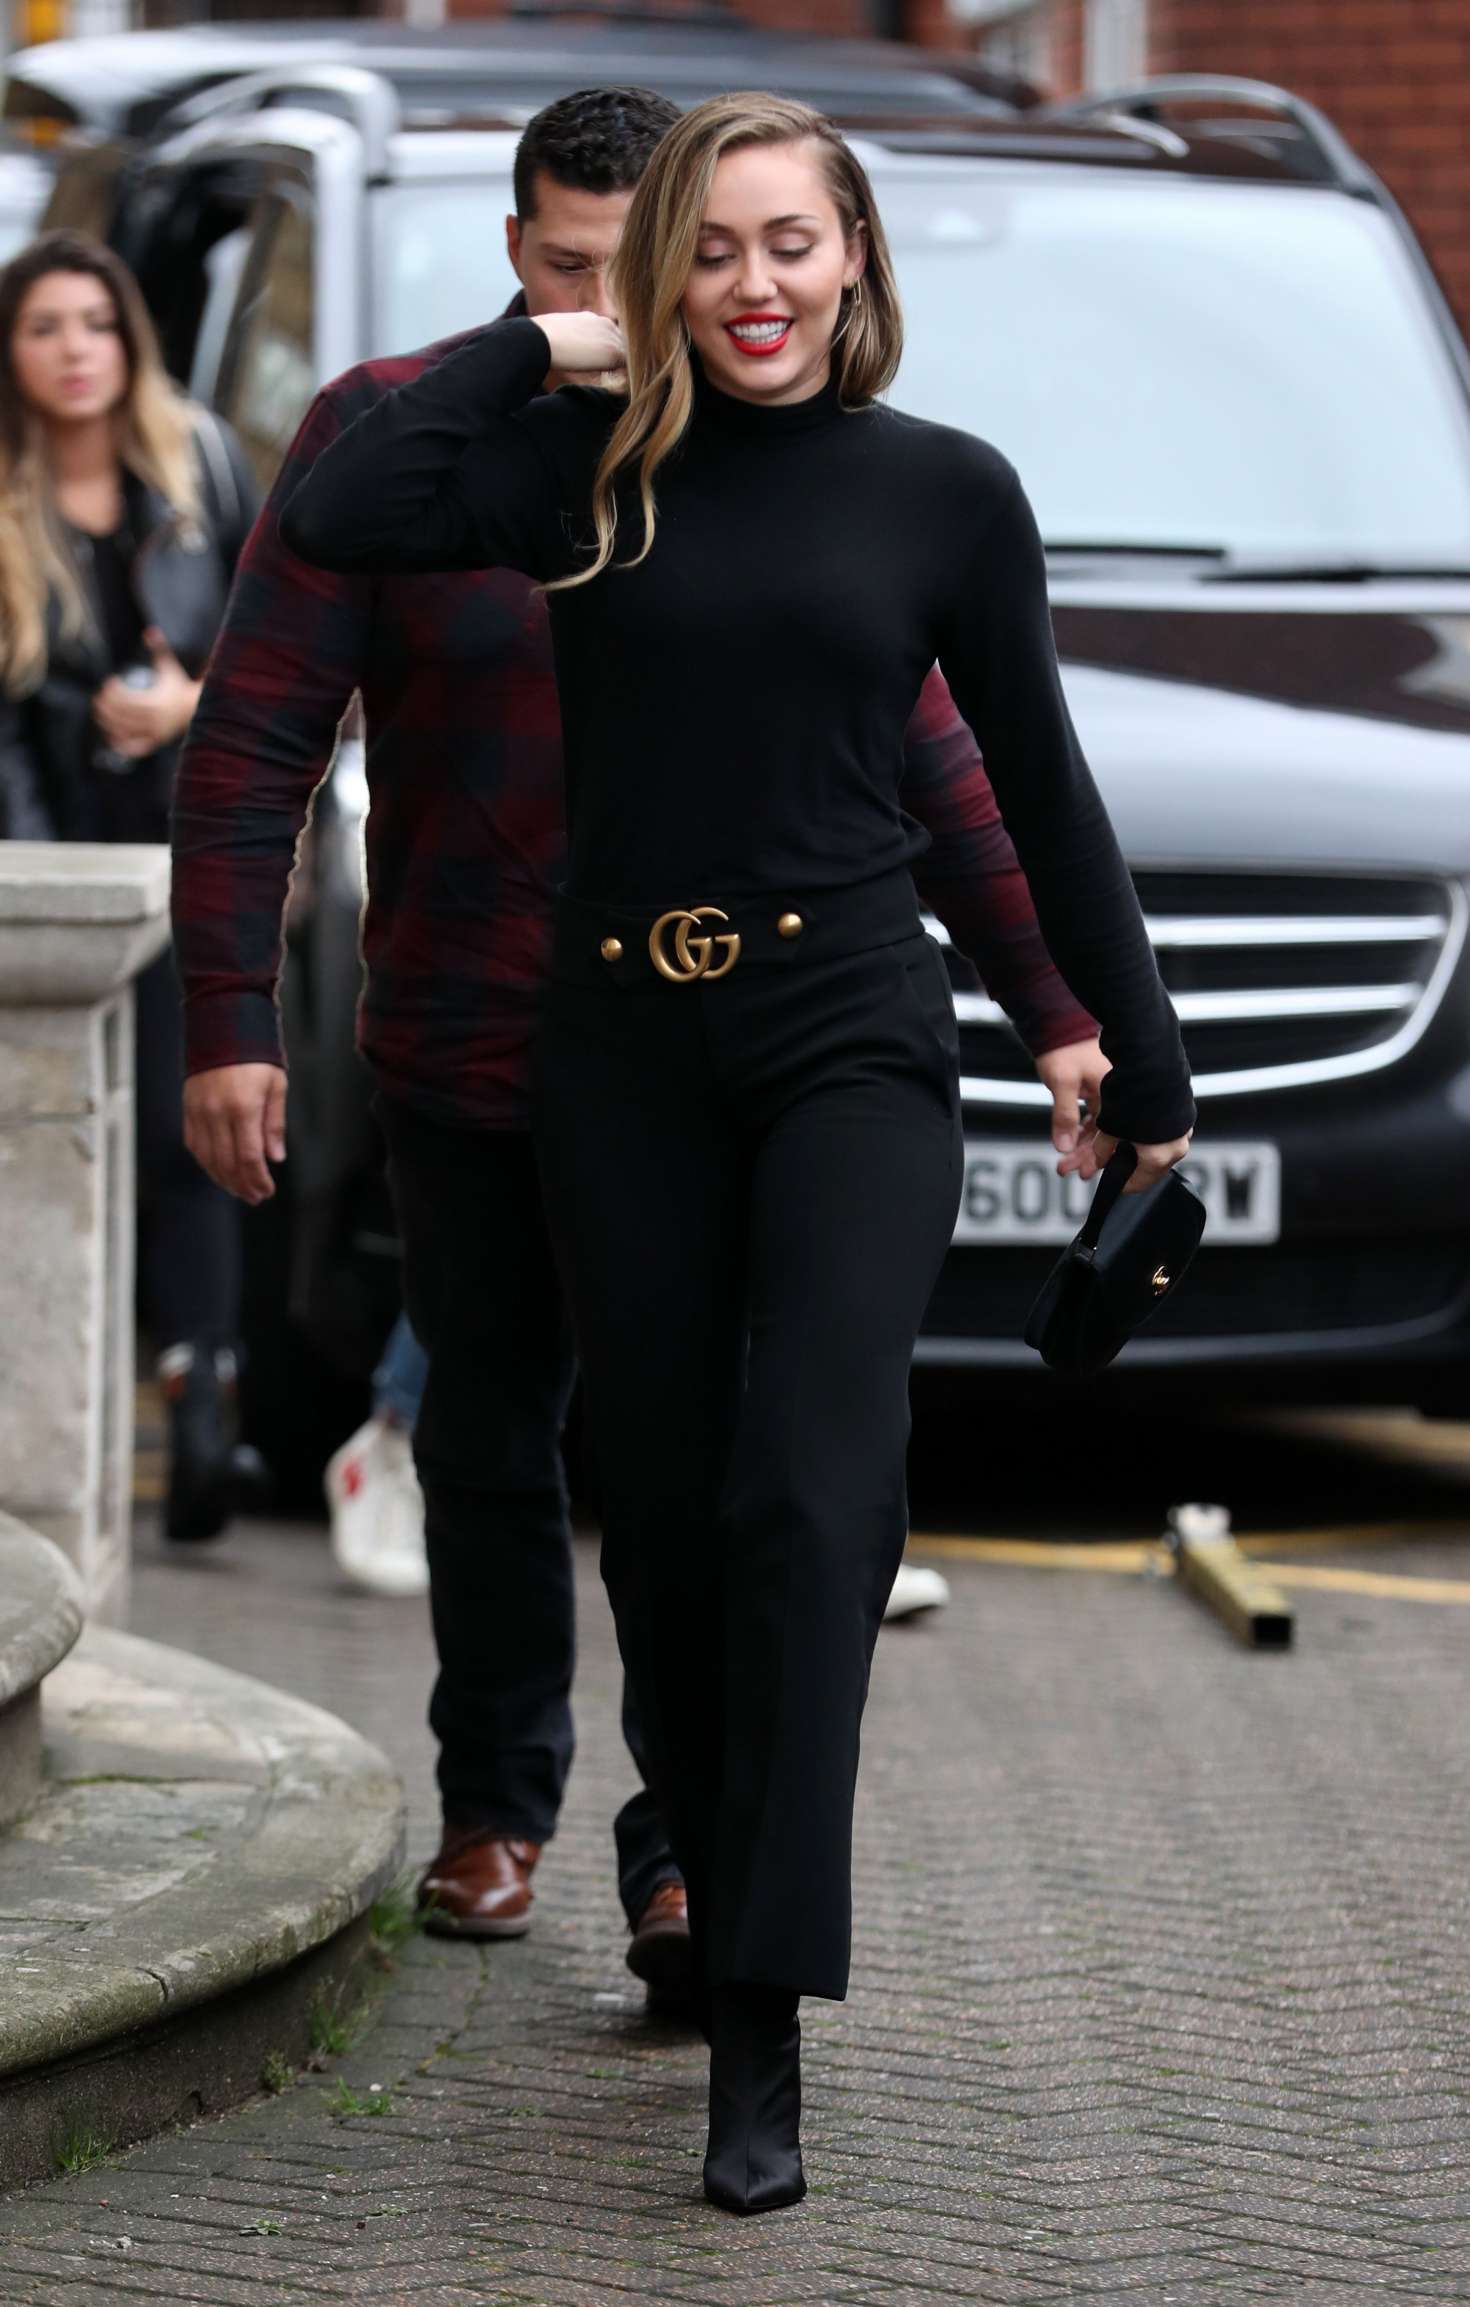 Miley Cyrus in Black Outfit â€“ Out in London